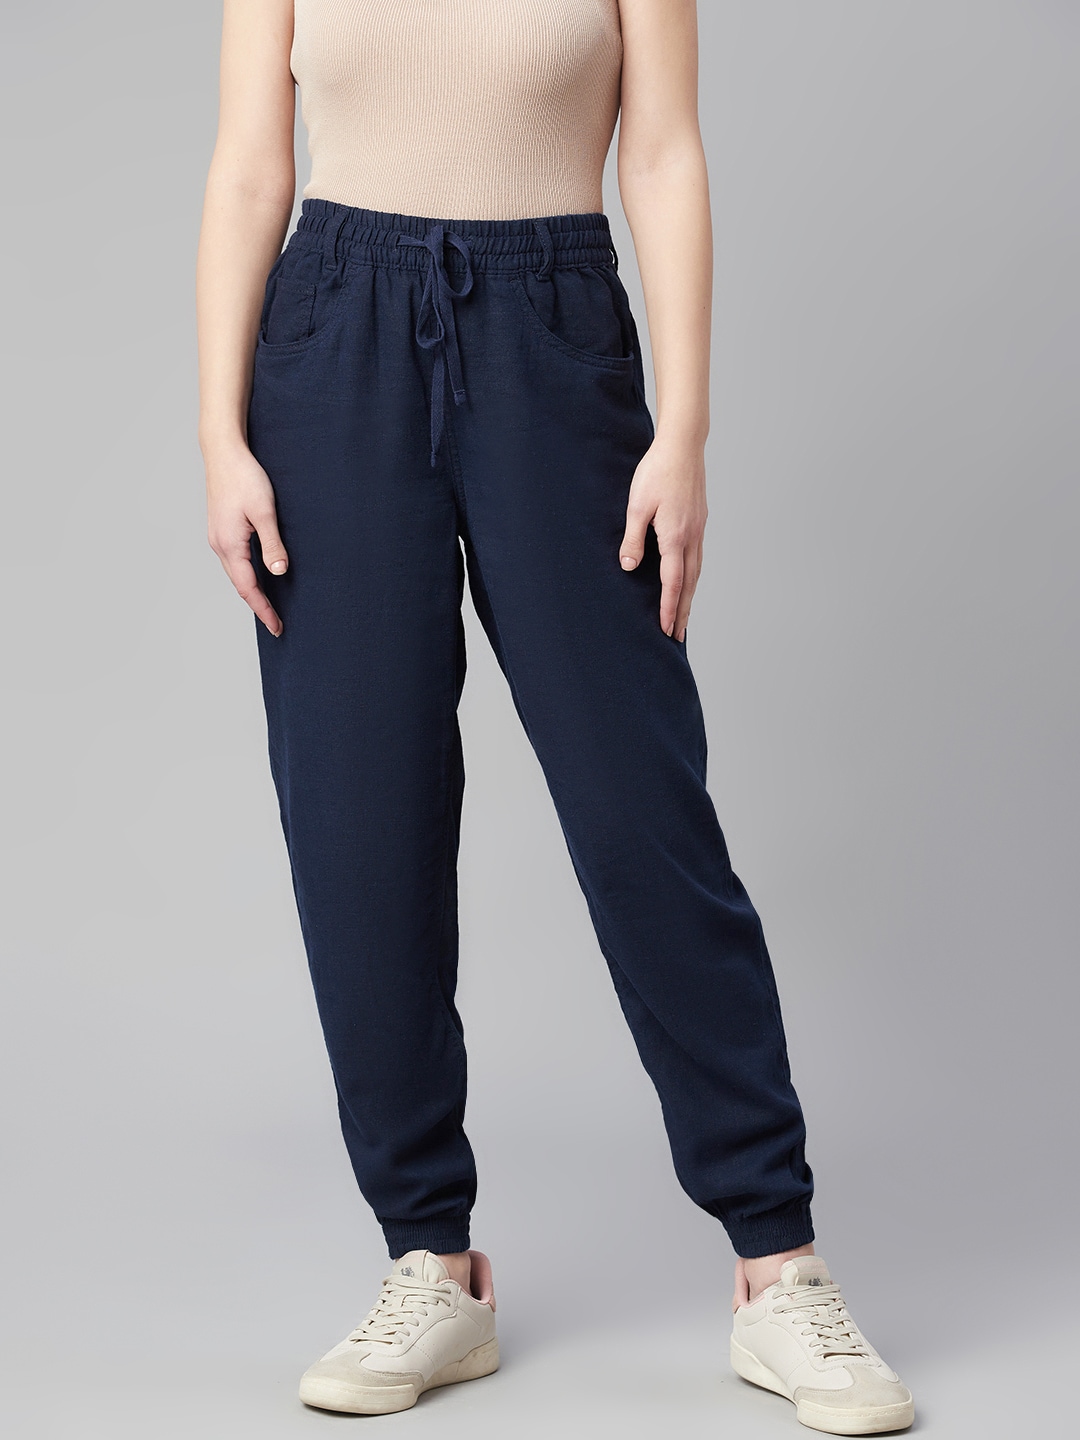 Marks & Spencer Women Navy Blue Solid Joggers Price in India